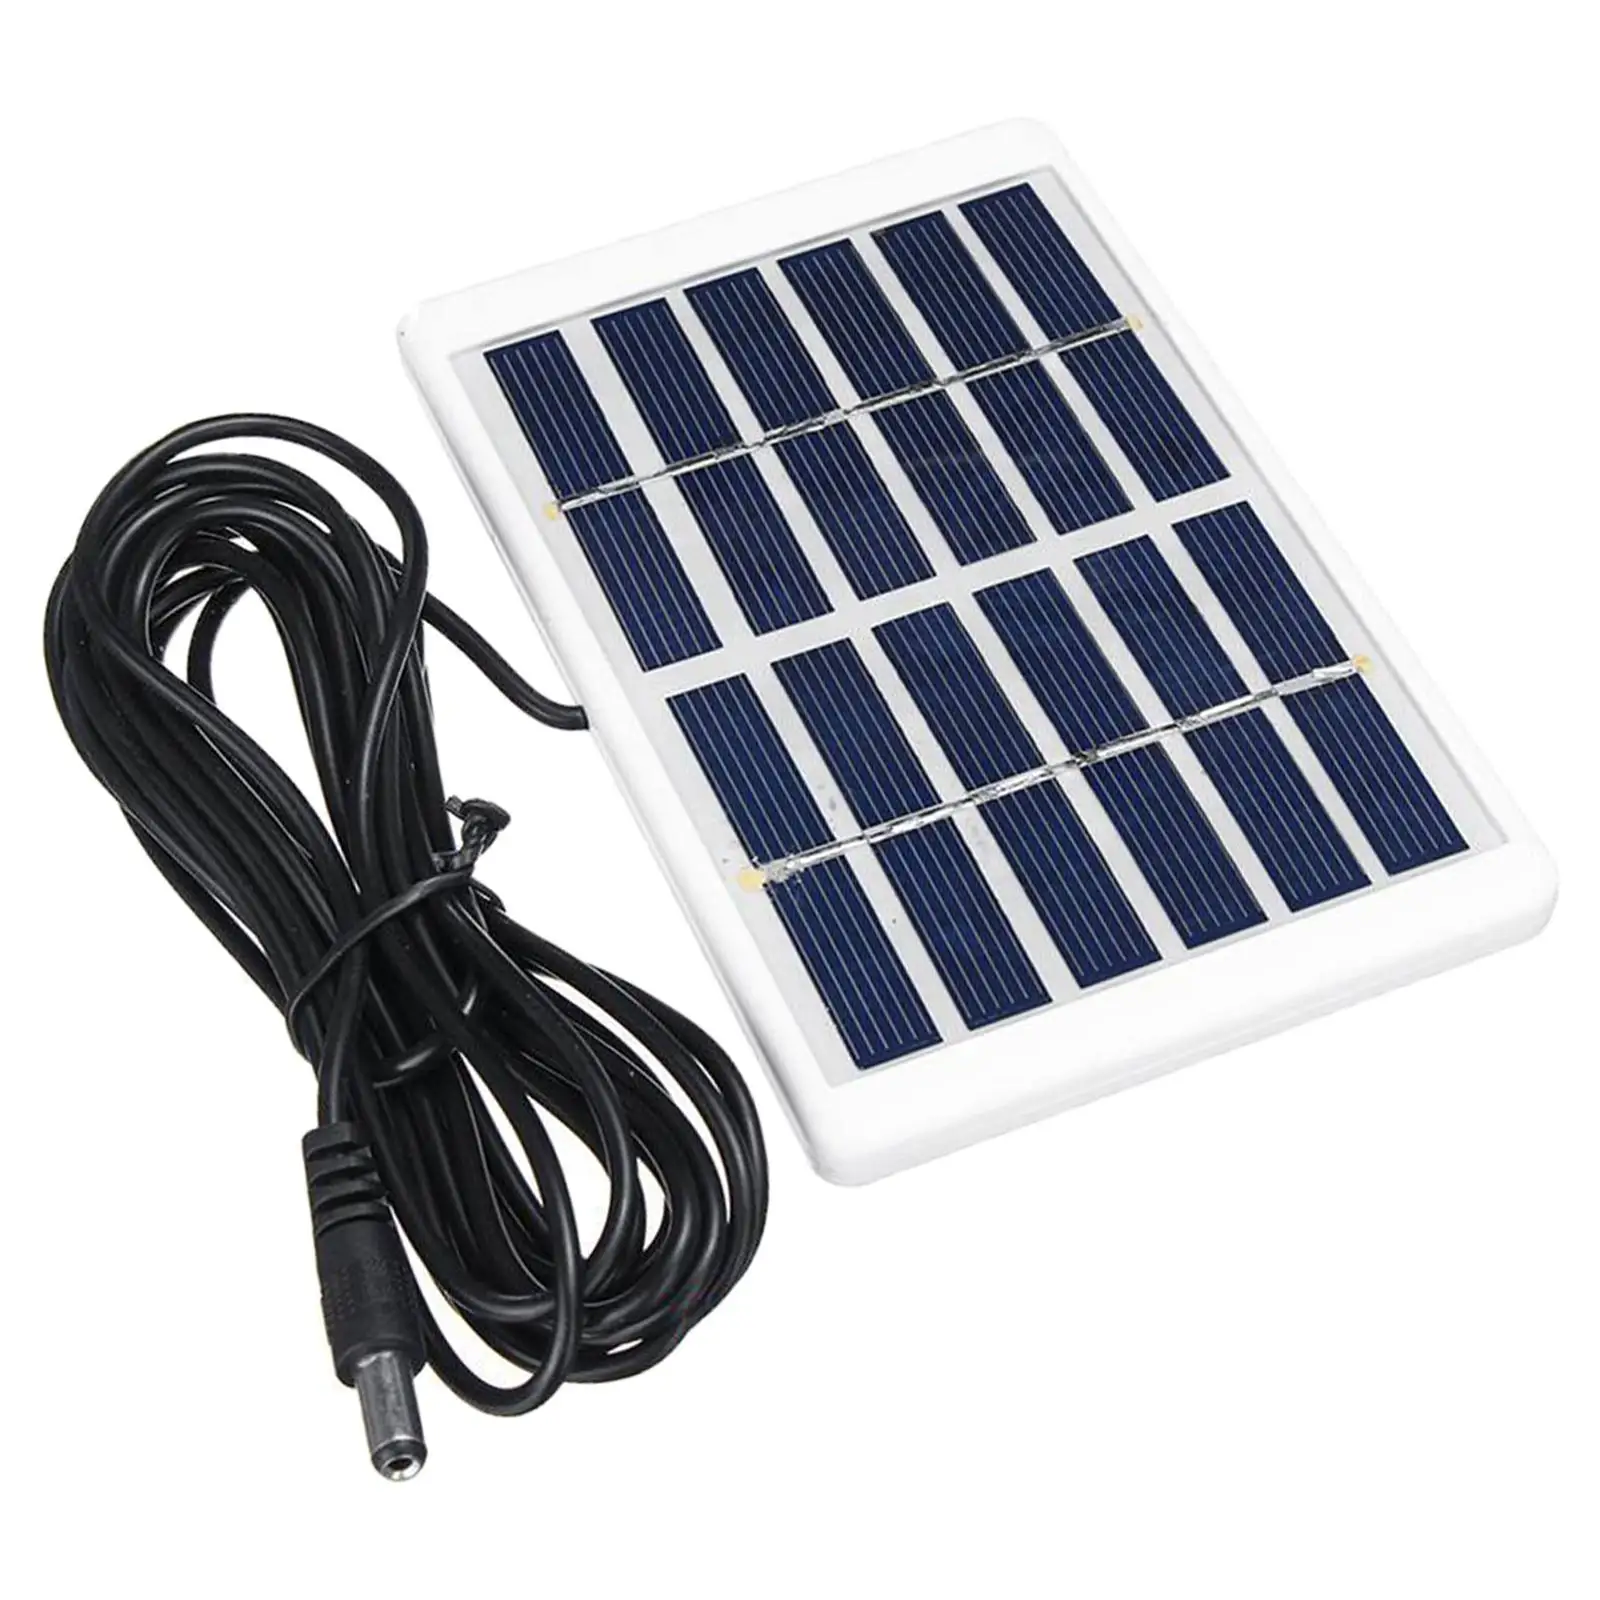 Portable DIY Battery Power Charge Module Solar Panel Charger Phone 3 Meters DC Cable Charger Polycrystalline DIY Mini Small